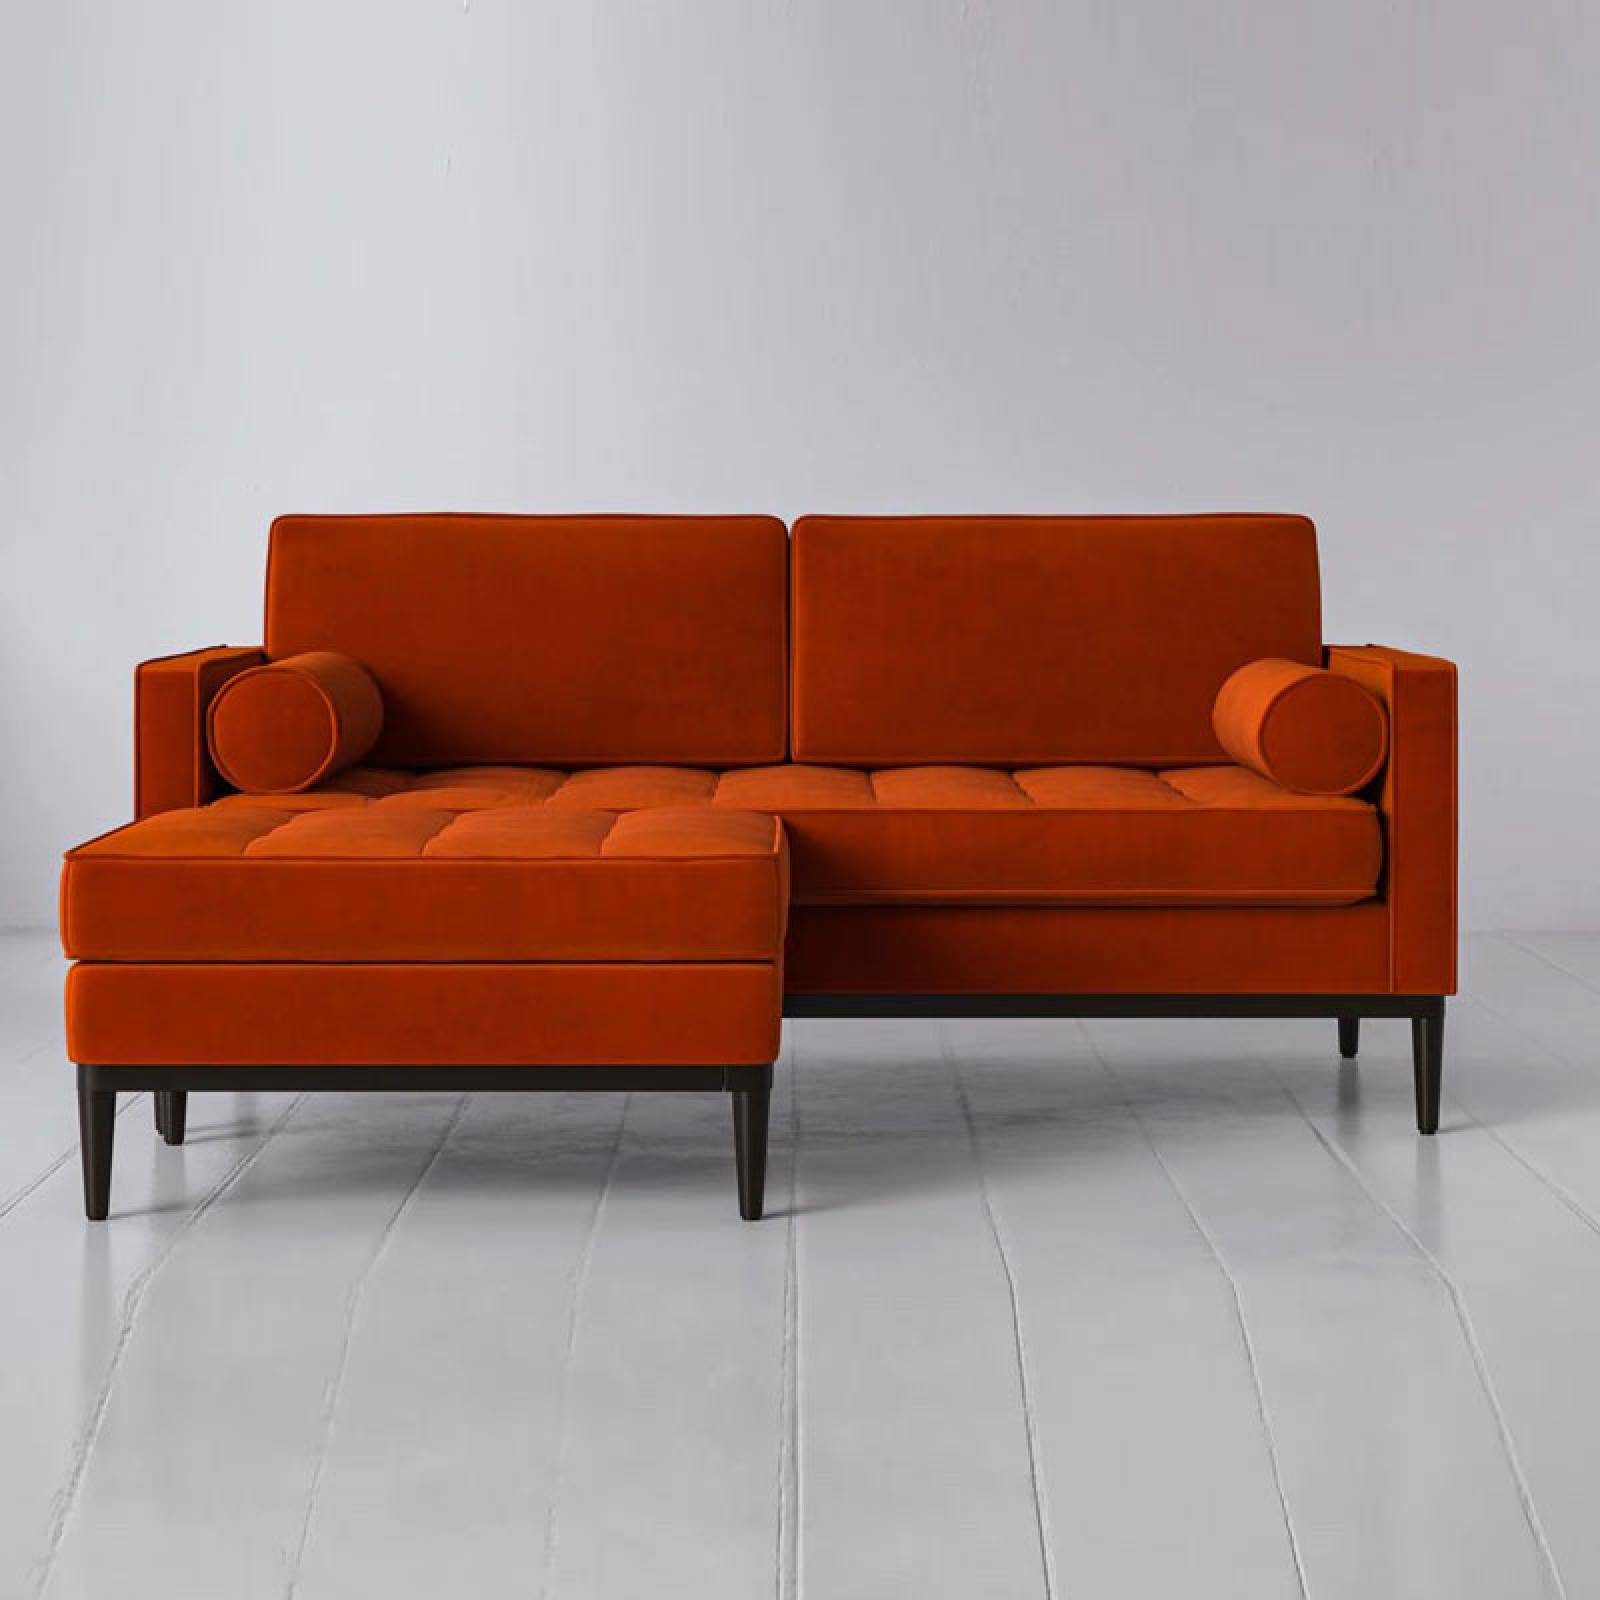 Swyft - Model 02 - 2 Seater Chaise Sofa - Left or Right